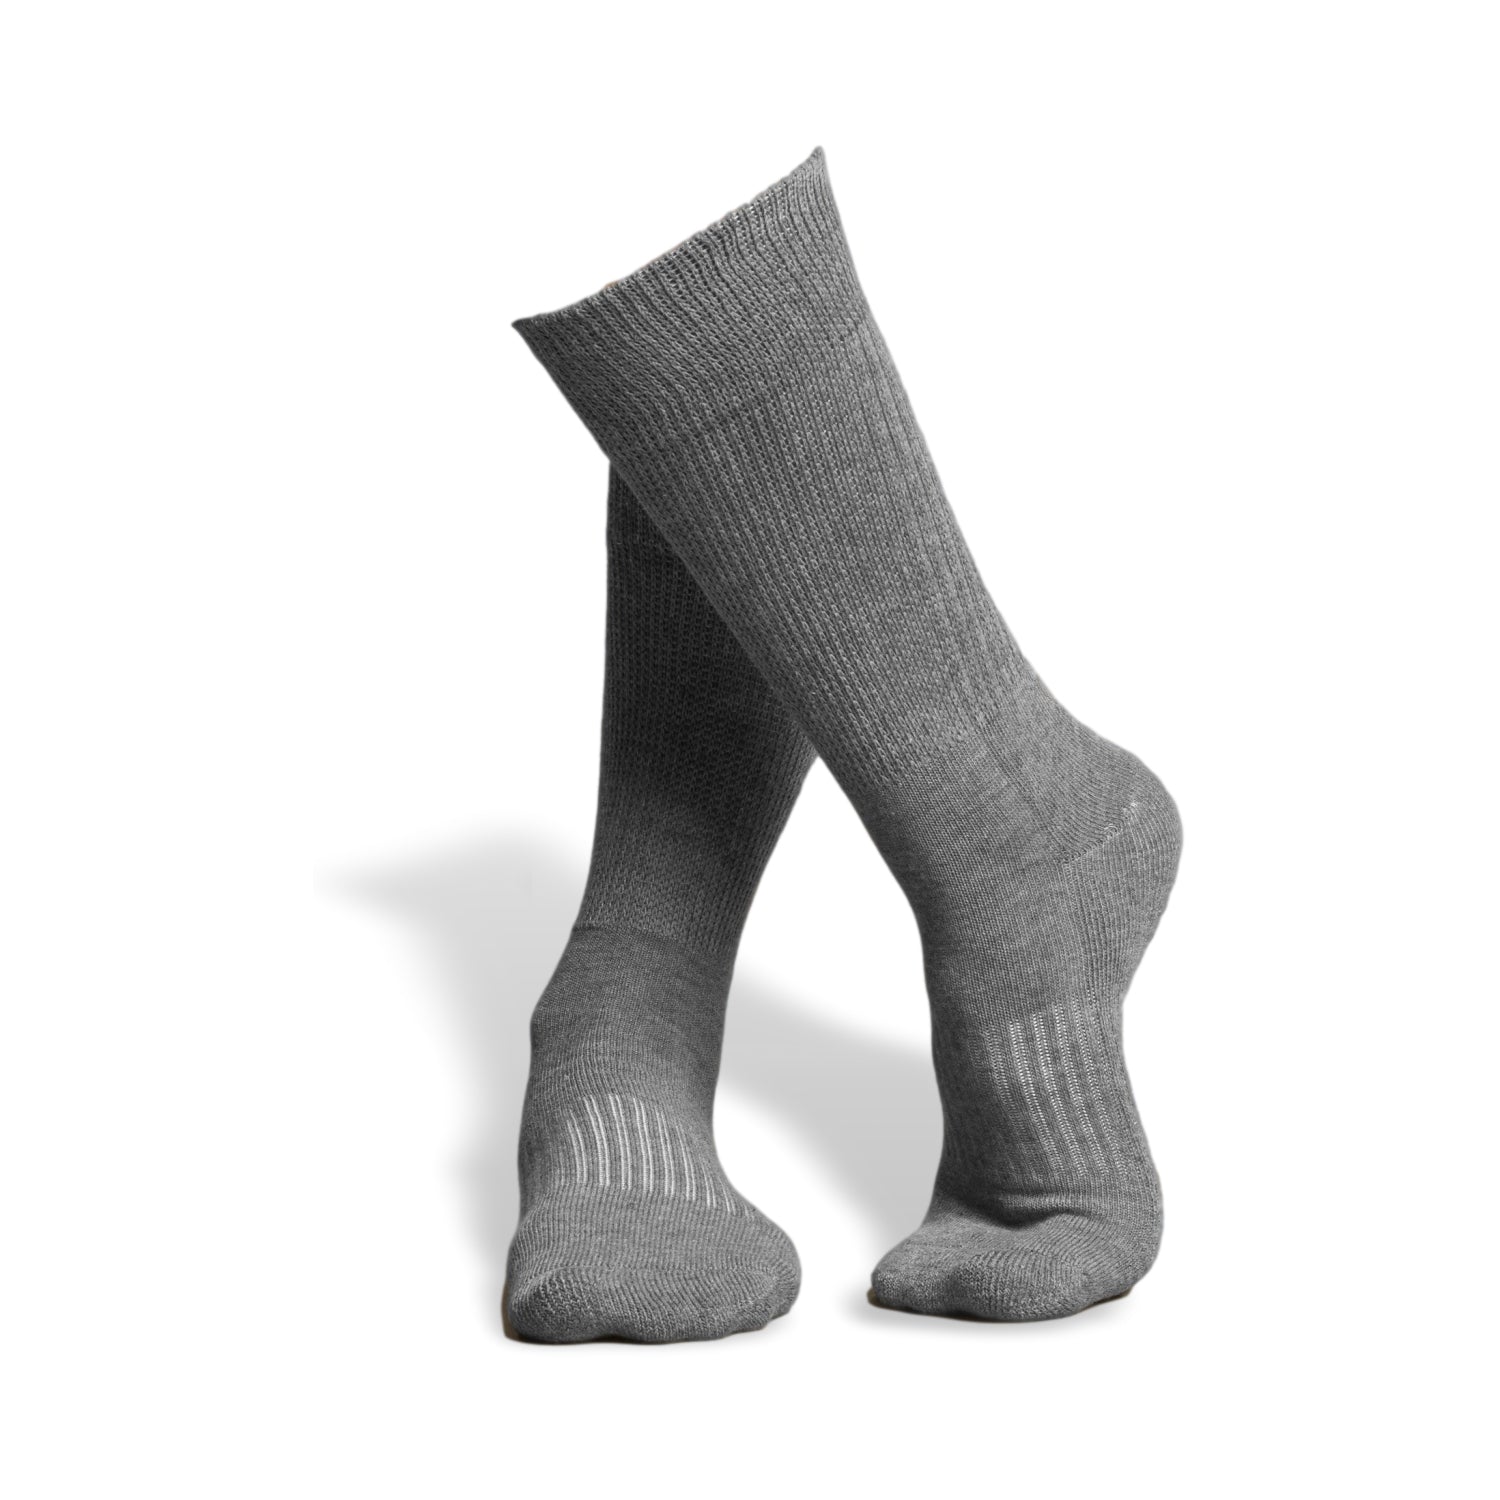 3 Pairs of Super Wide Socks With Non-Skid Grips for Swollen Feet